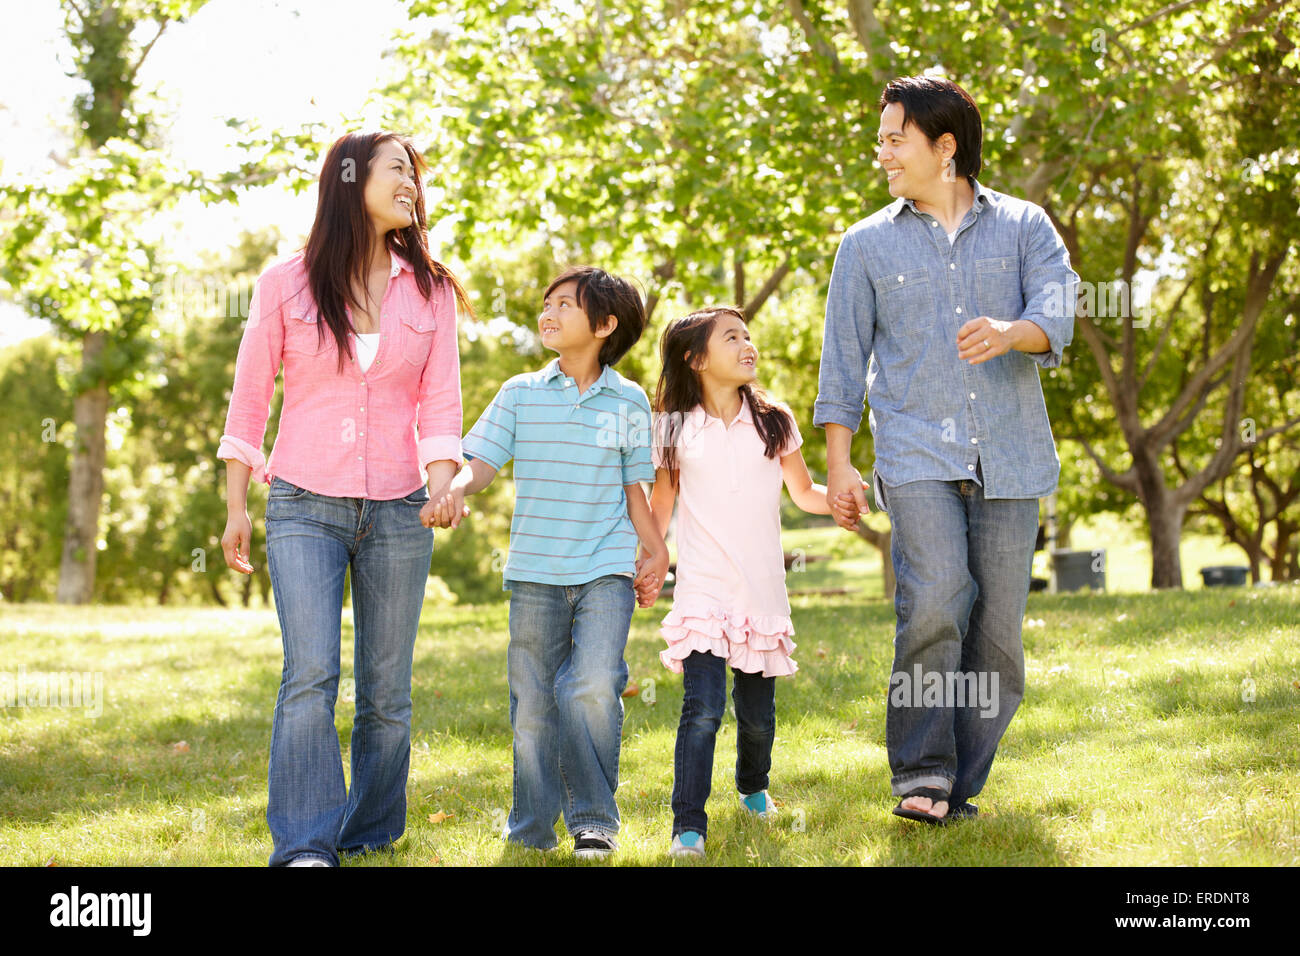 Asian family walking hand in hand in park Stock Photo